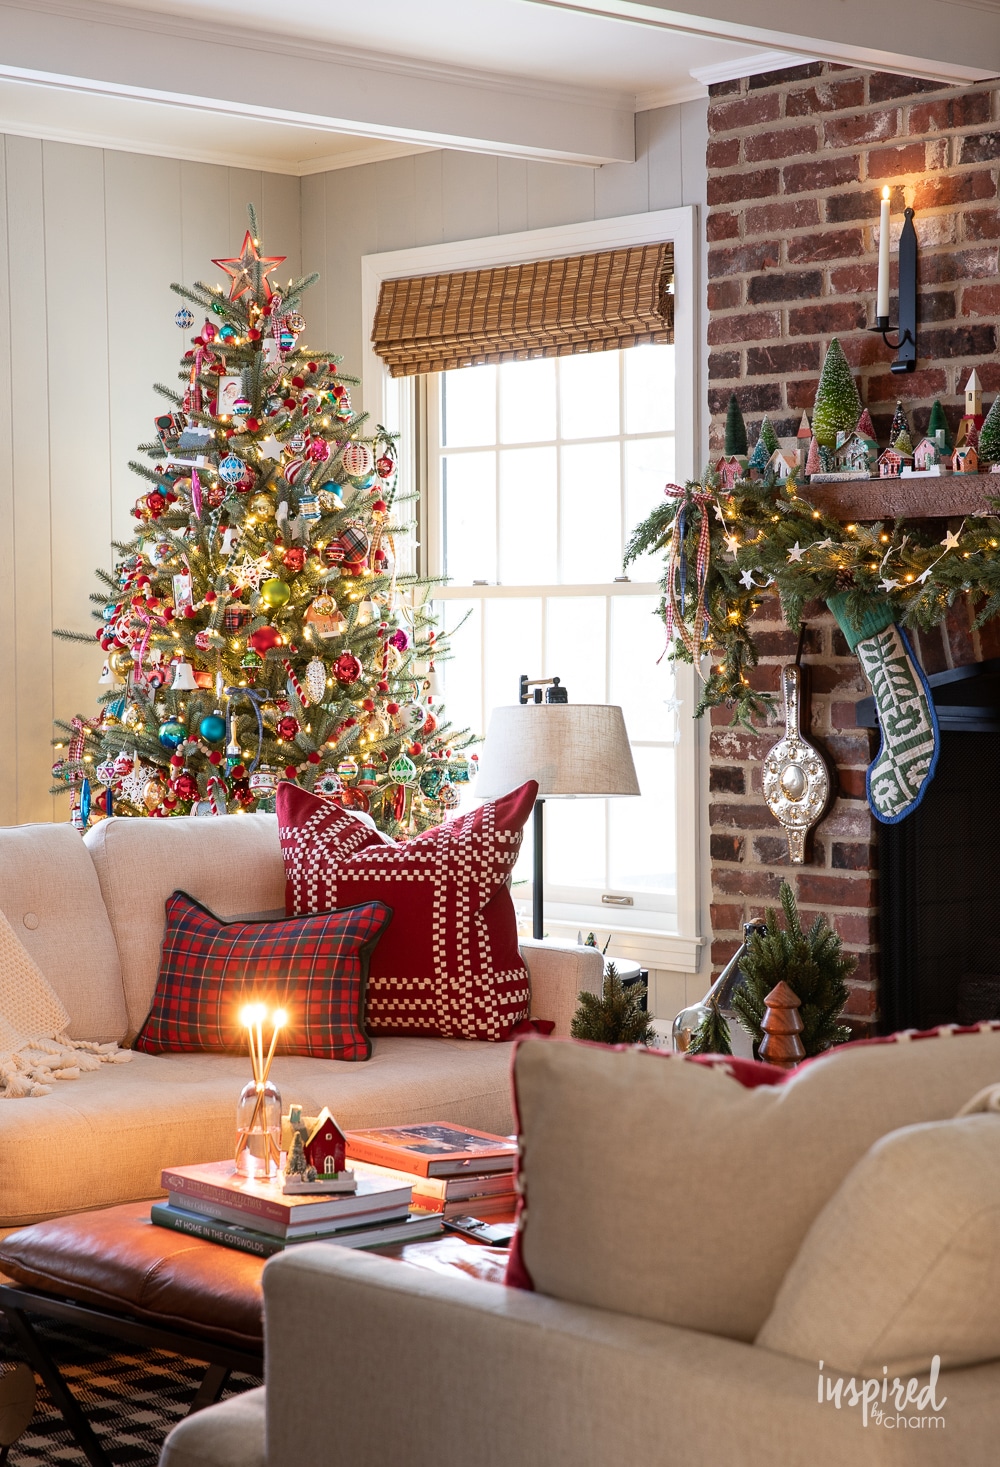 living room with sofa, pillow, brick fireplace and colorfully decorated christmas tree.